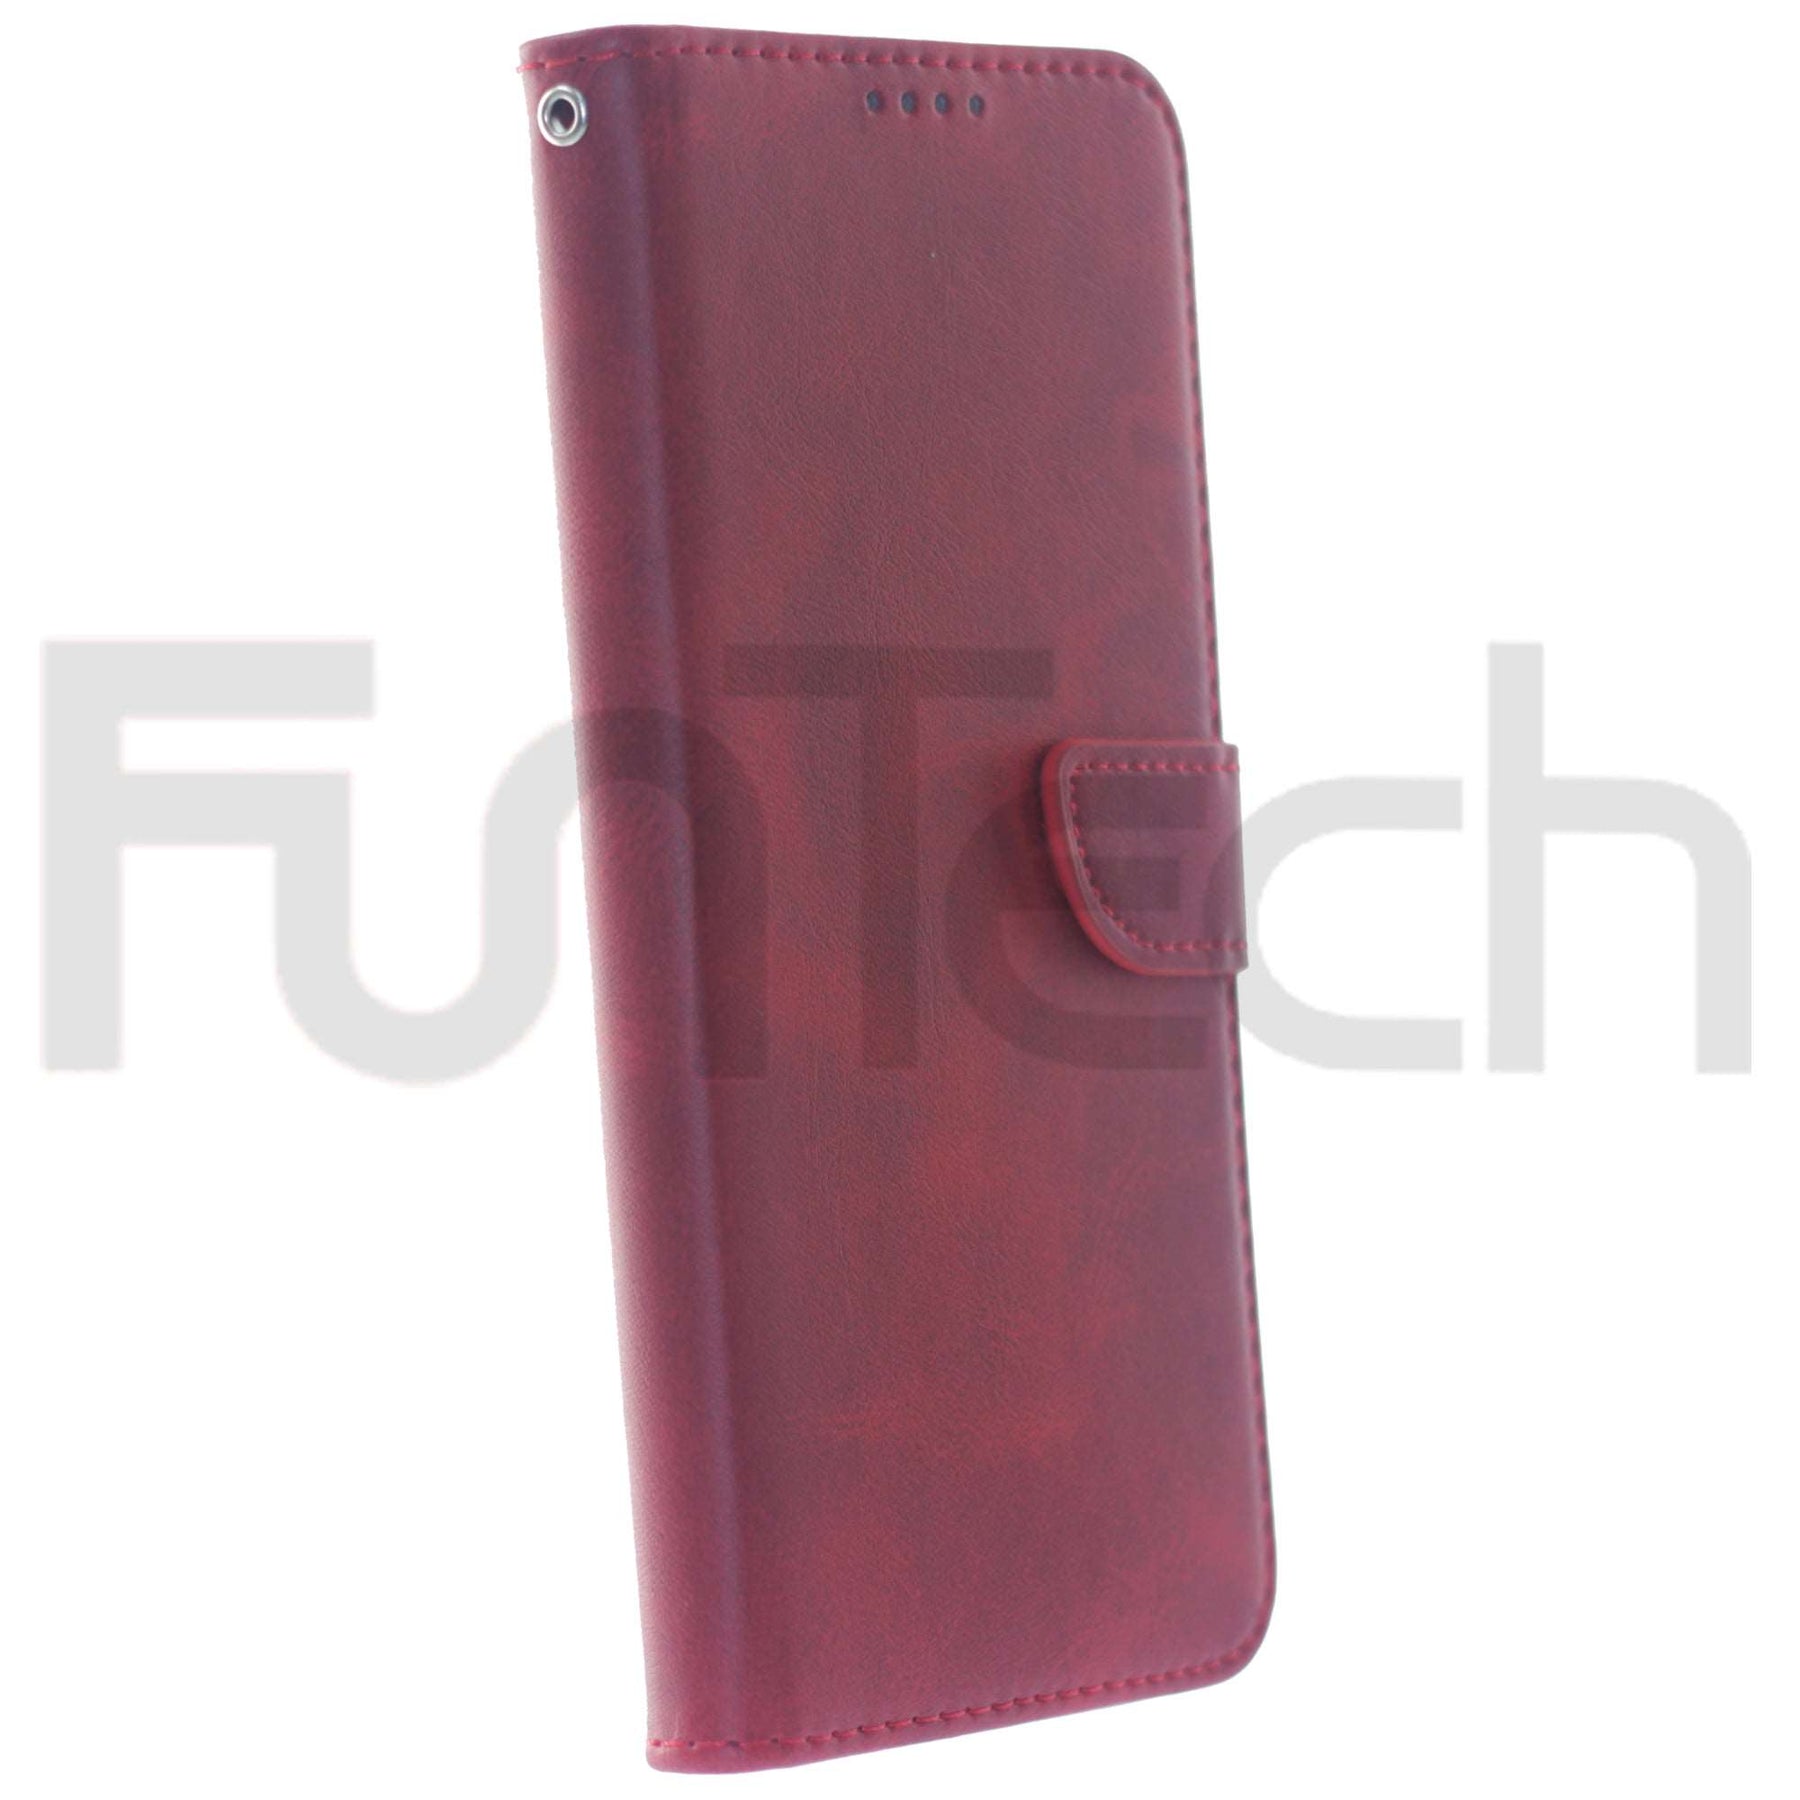 Oppo Reno 4 Pro 5G Lite, Leather Wallet Case, Color Red.